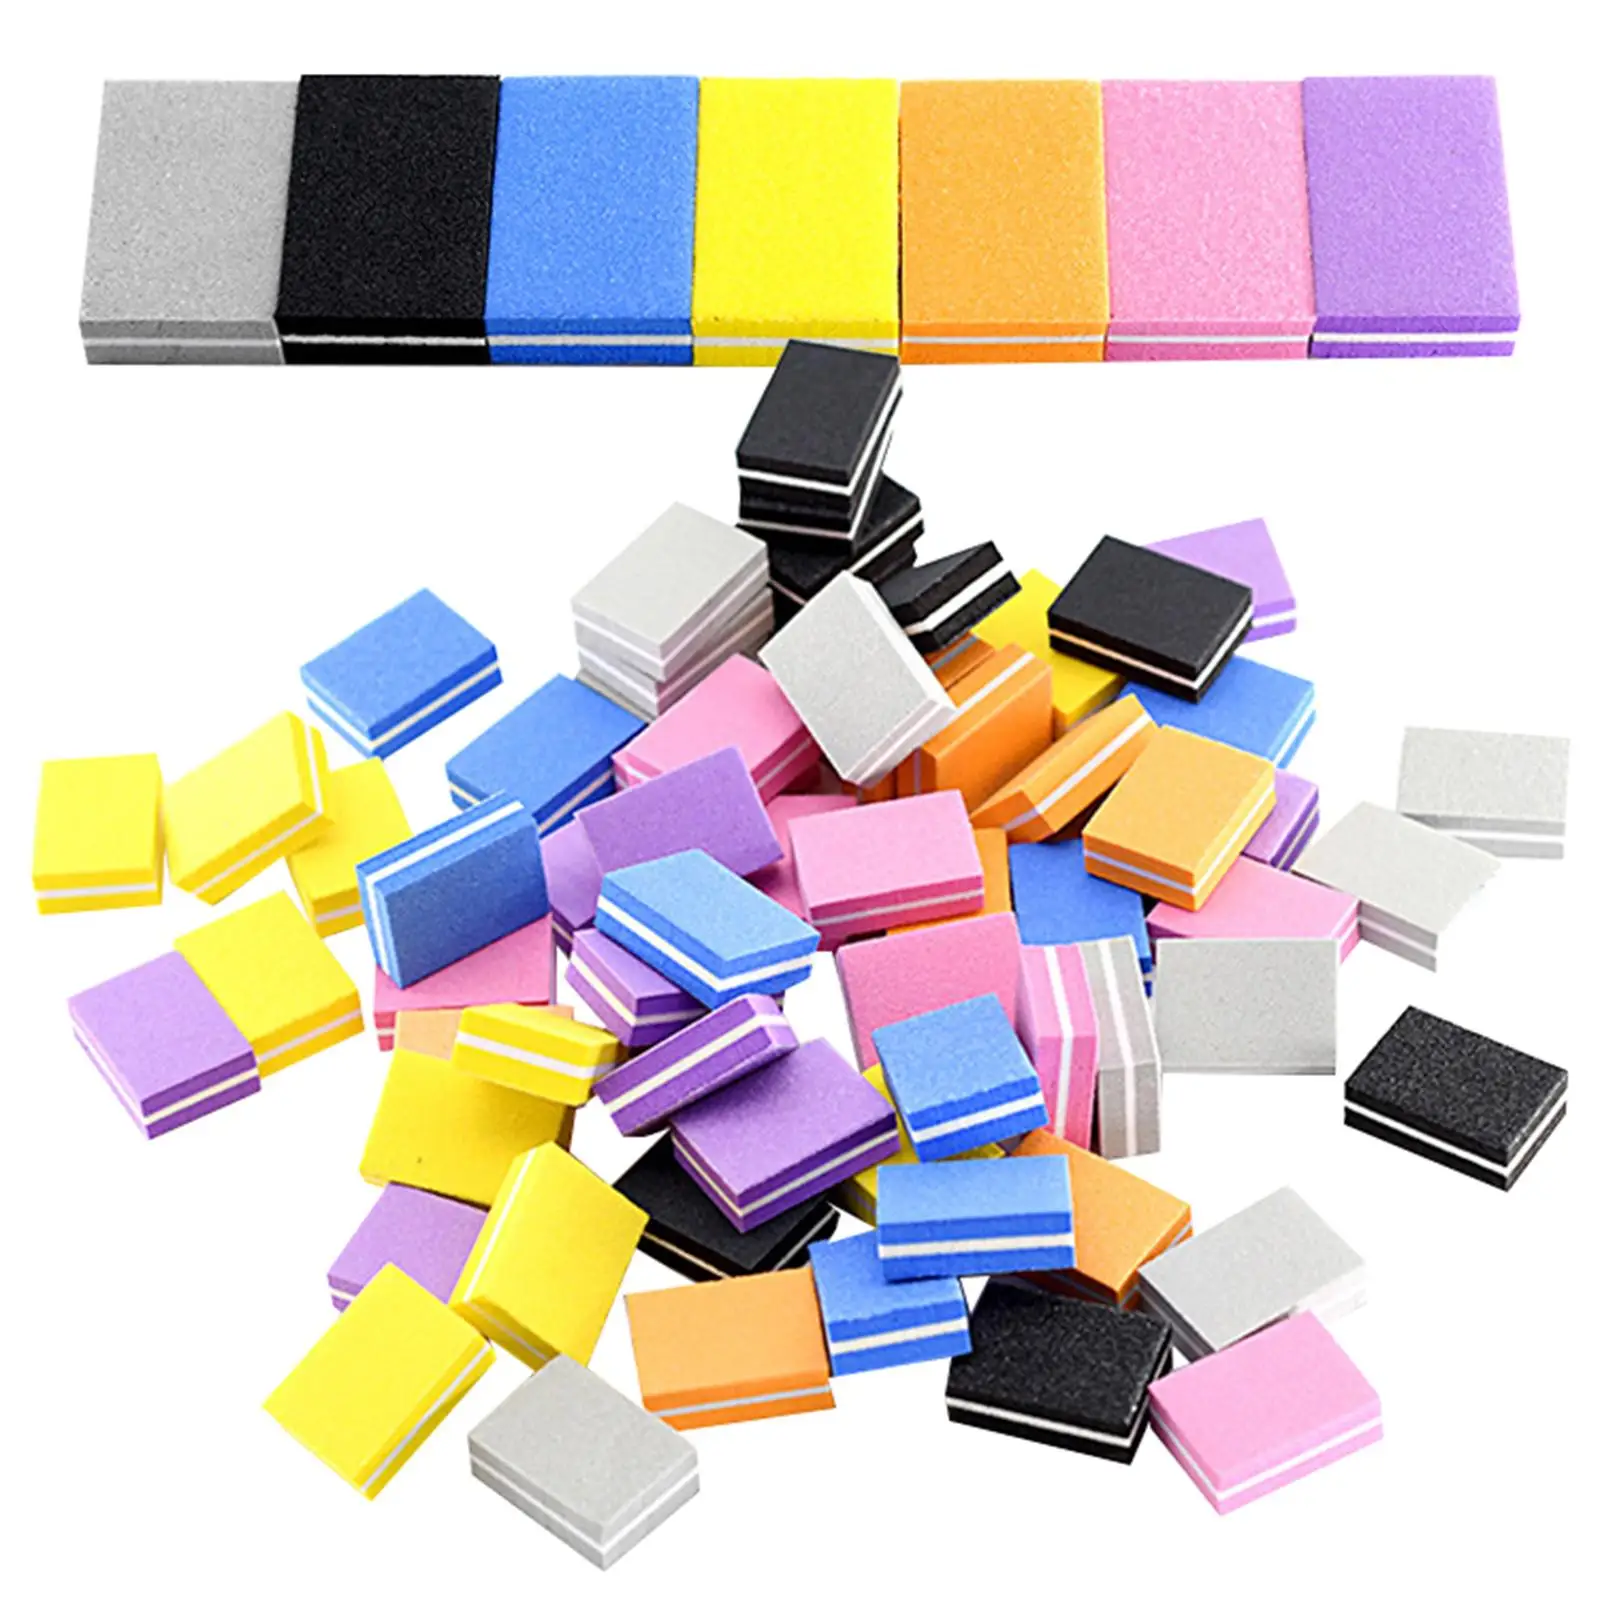 100x Nail Buffer Blocks Buffing File Sanding for Manicure Pedicure Tool